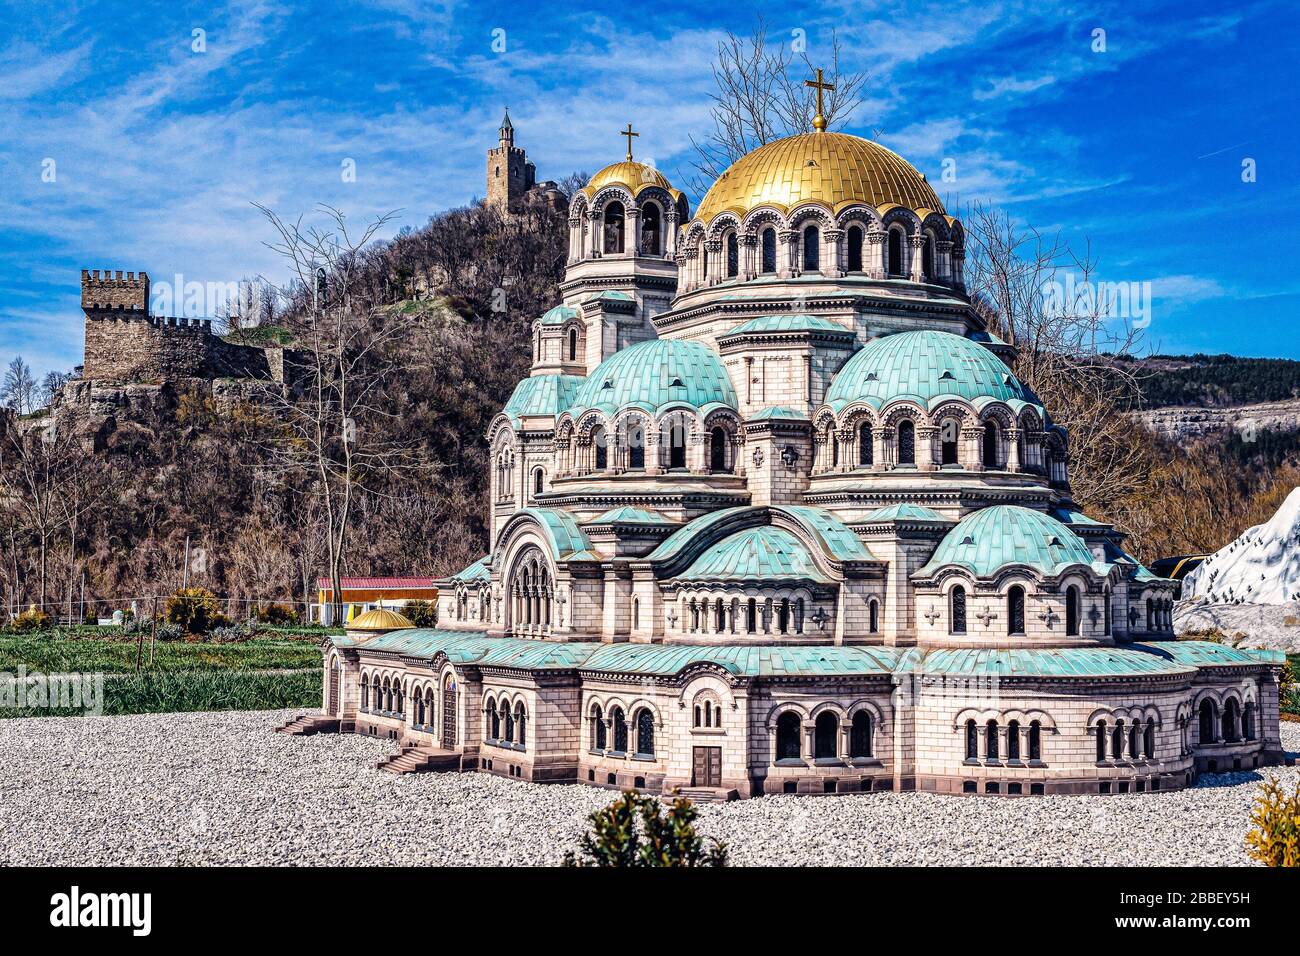 Model of Alexander Nevsky Cathedral with Tsaravets fortress in the background at mini Bulgaria model visitor attraction Veliko Tarnovo Bulgaria Stock Photo